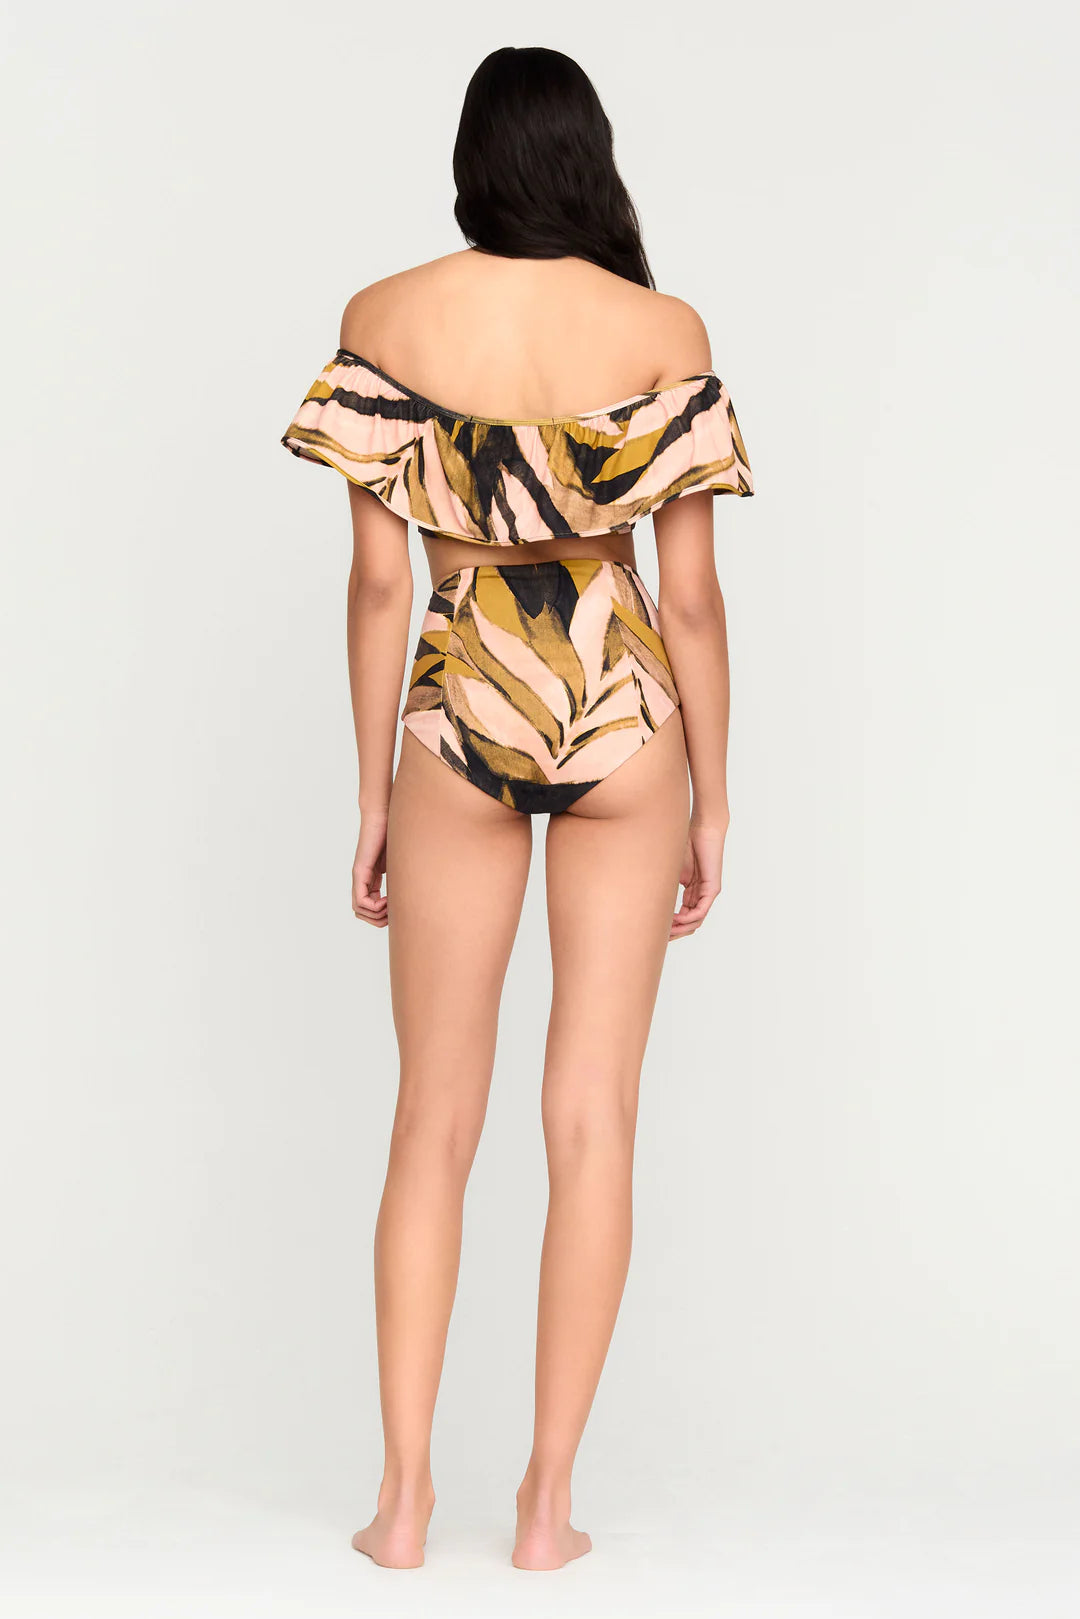 Marie Oliver Micha Bottoms | Tropical Sand